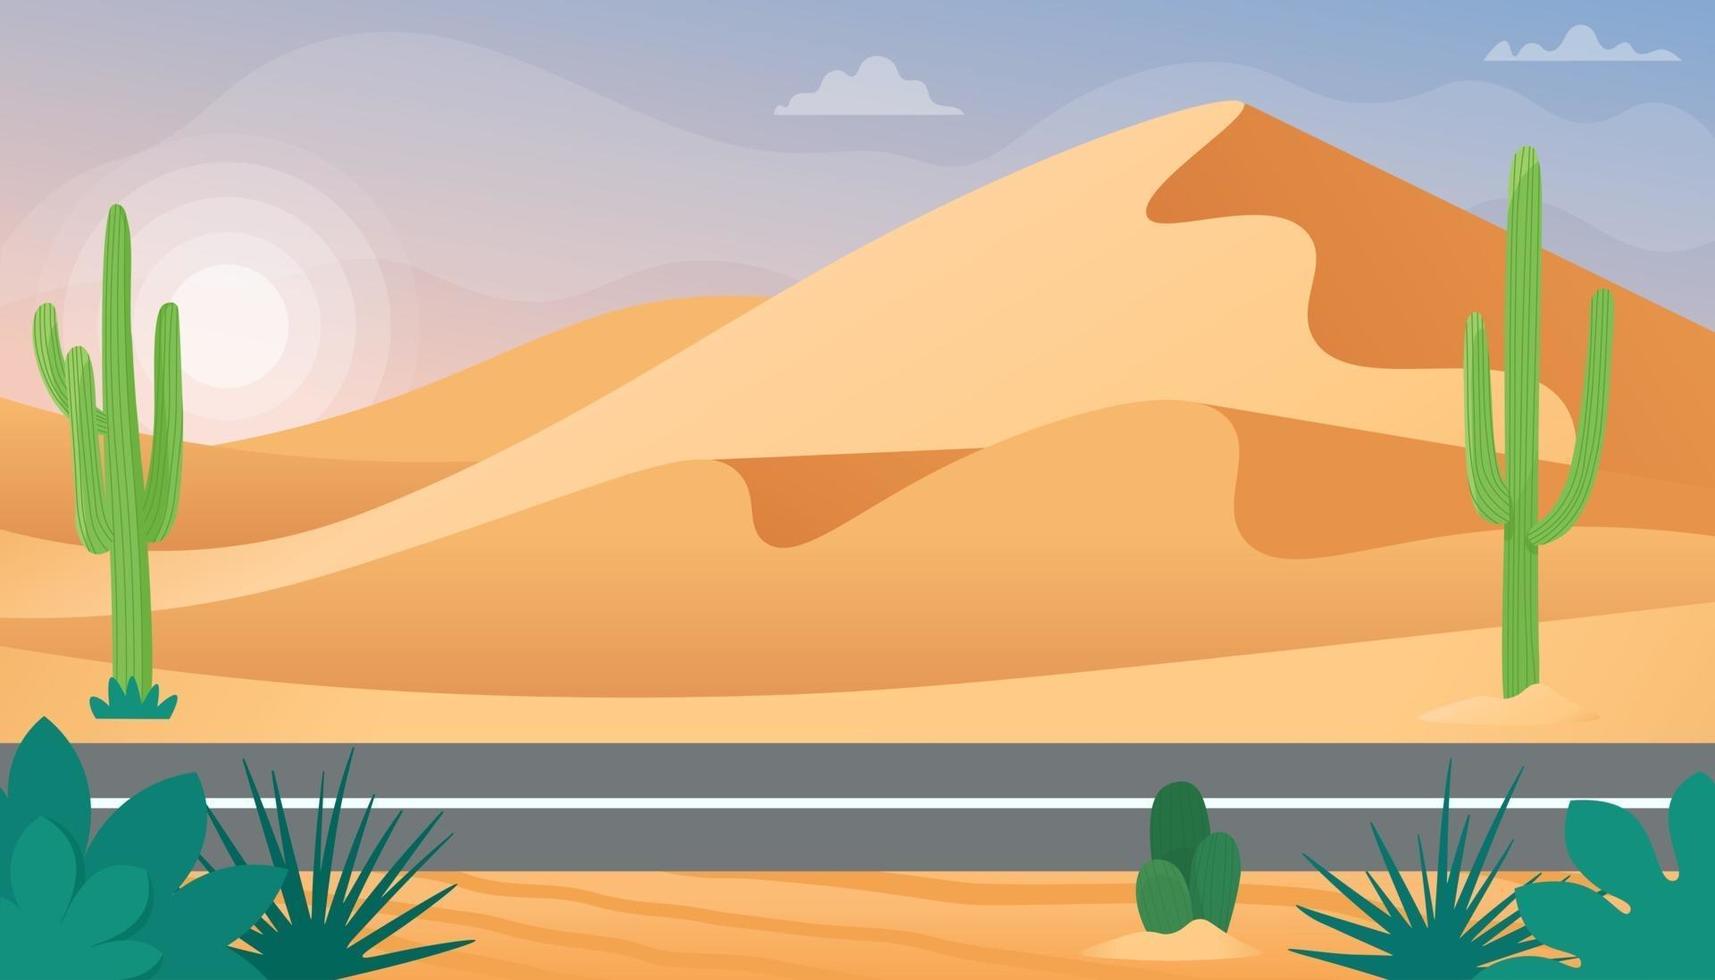 Desert landscape with Sand dunes and cacti. Vector illustration in flat style